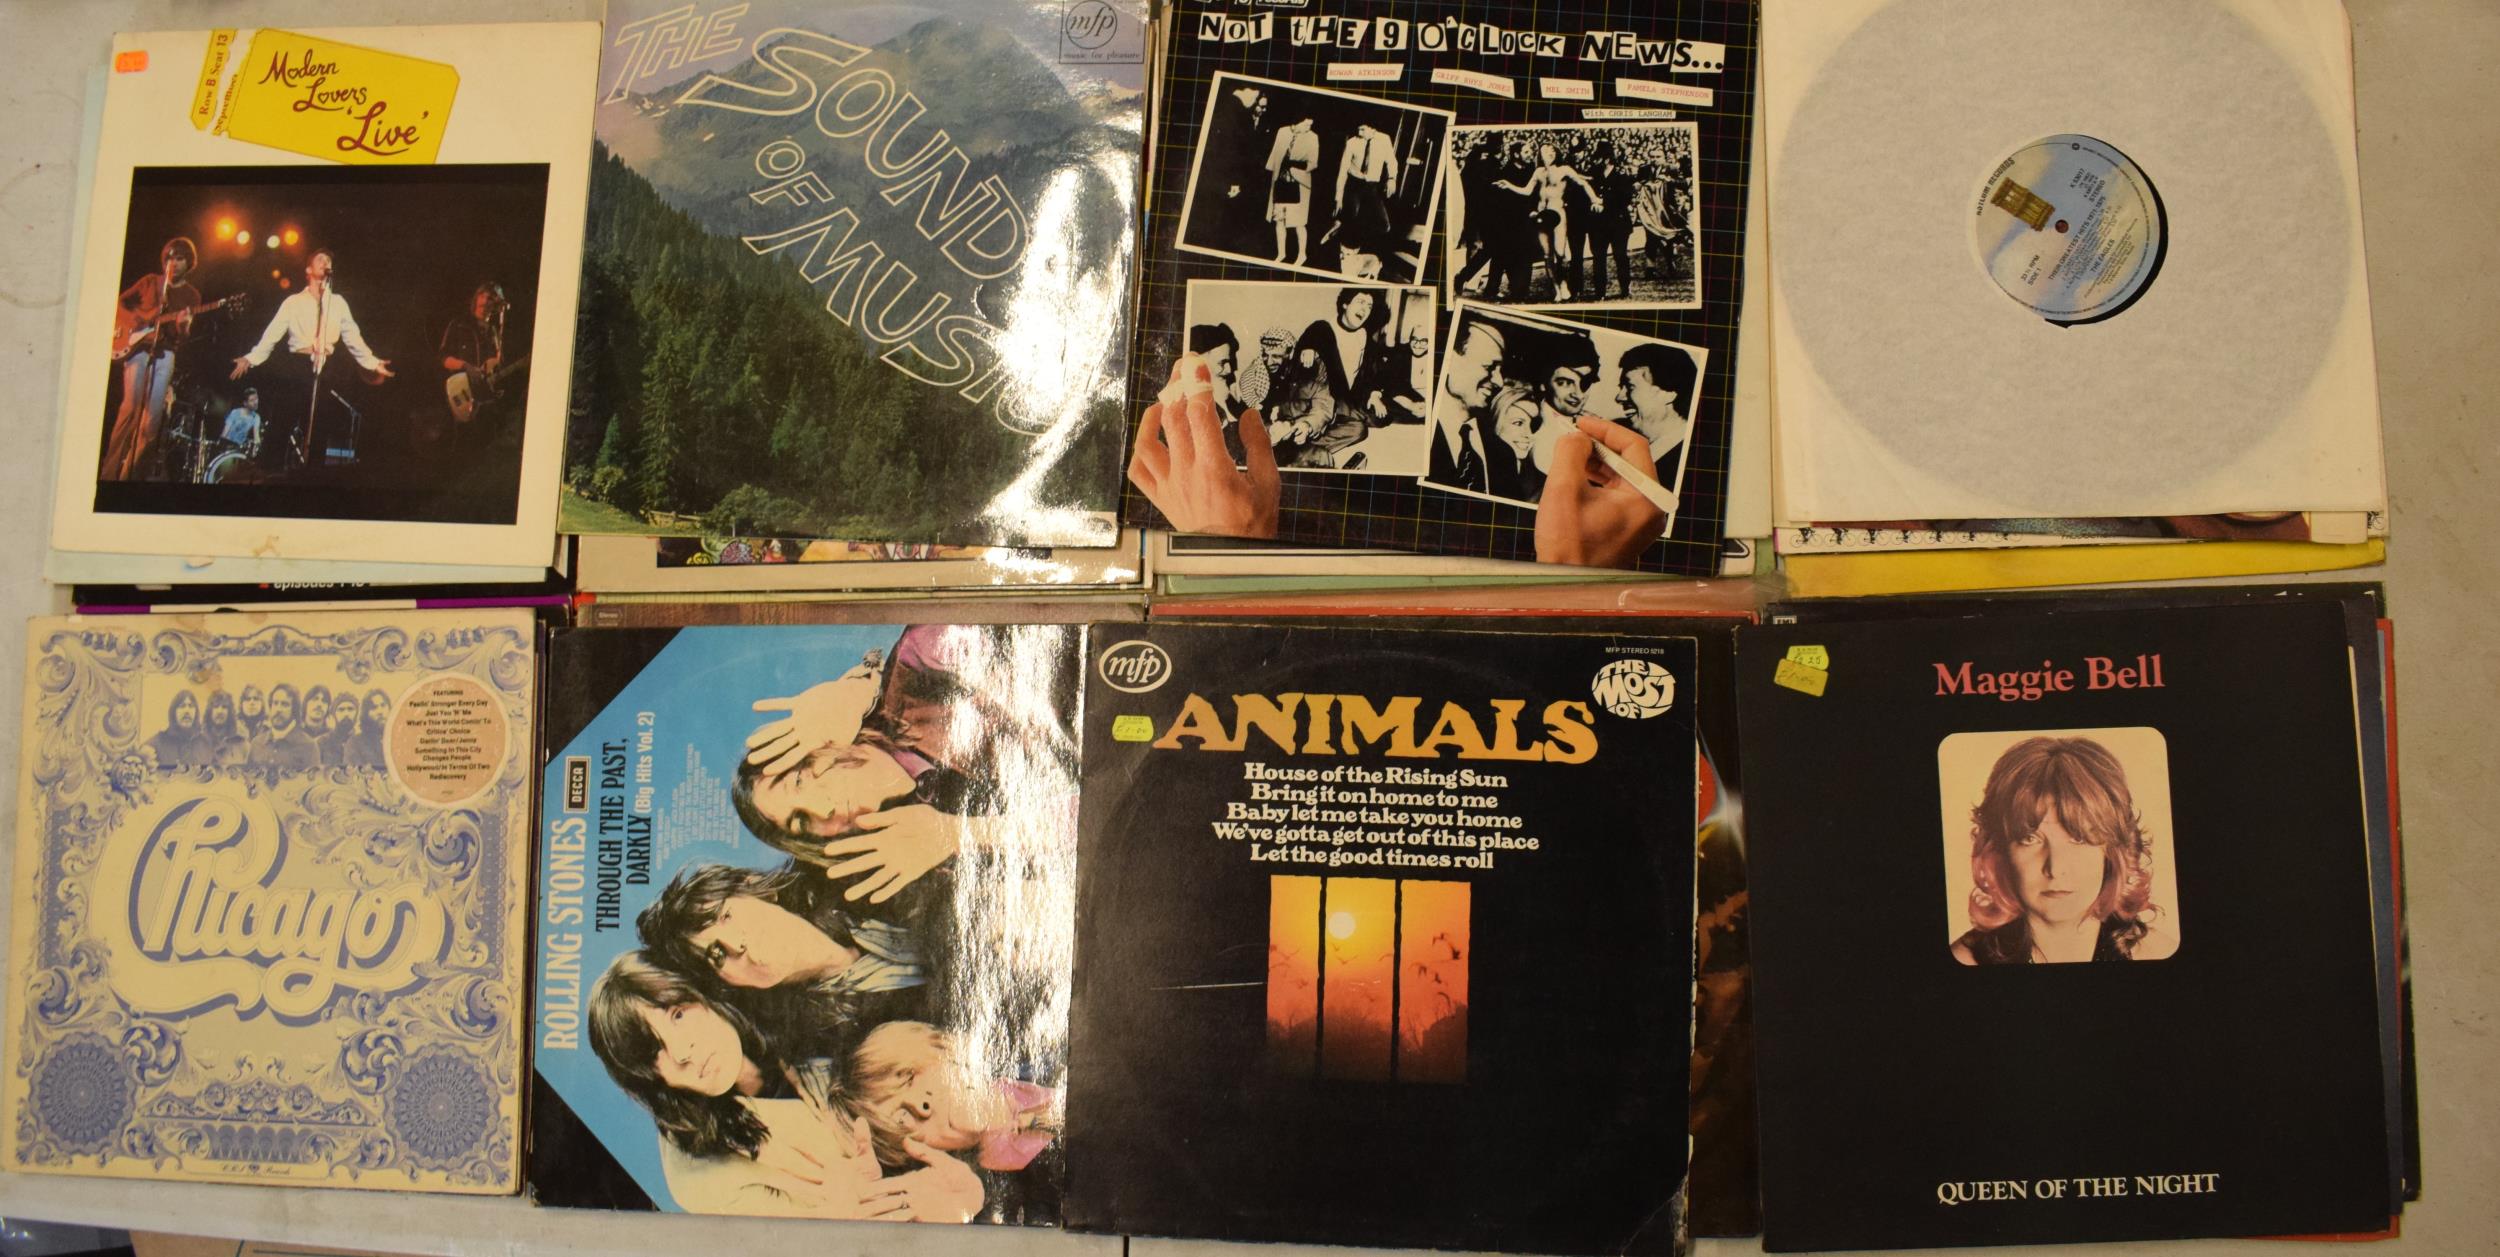 A collection of vinyl records to include artists such as Eric Clapton, Yes, Wishbone Ash and other - Image 2 of 6